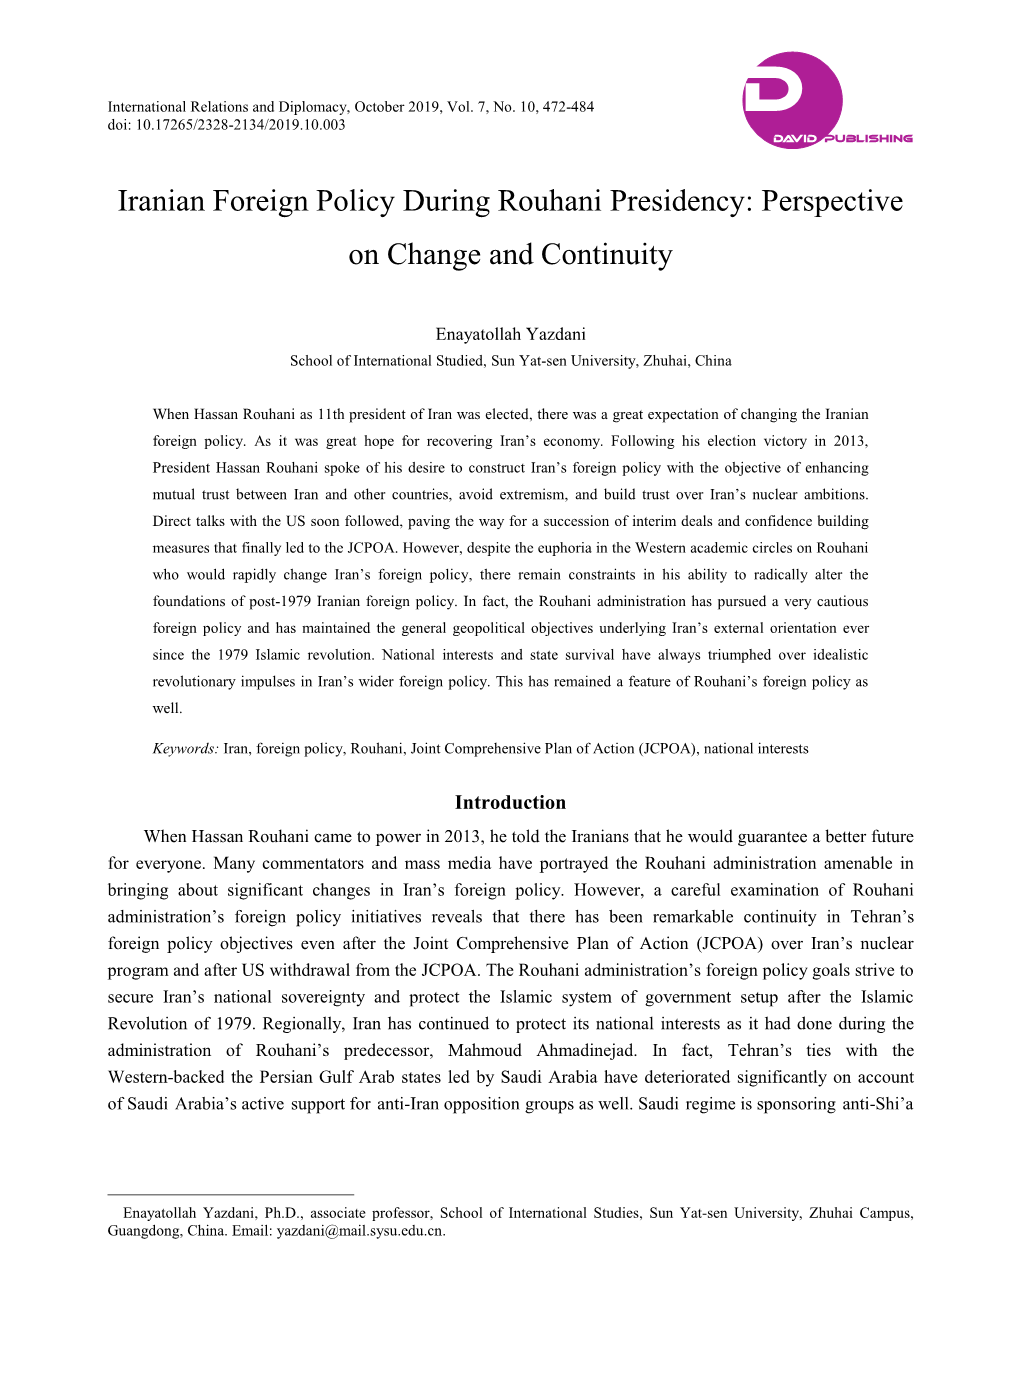 Iranian Foreign Policy During Rouhani Presidency: Perspective on Change and Continuity